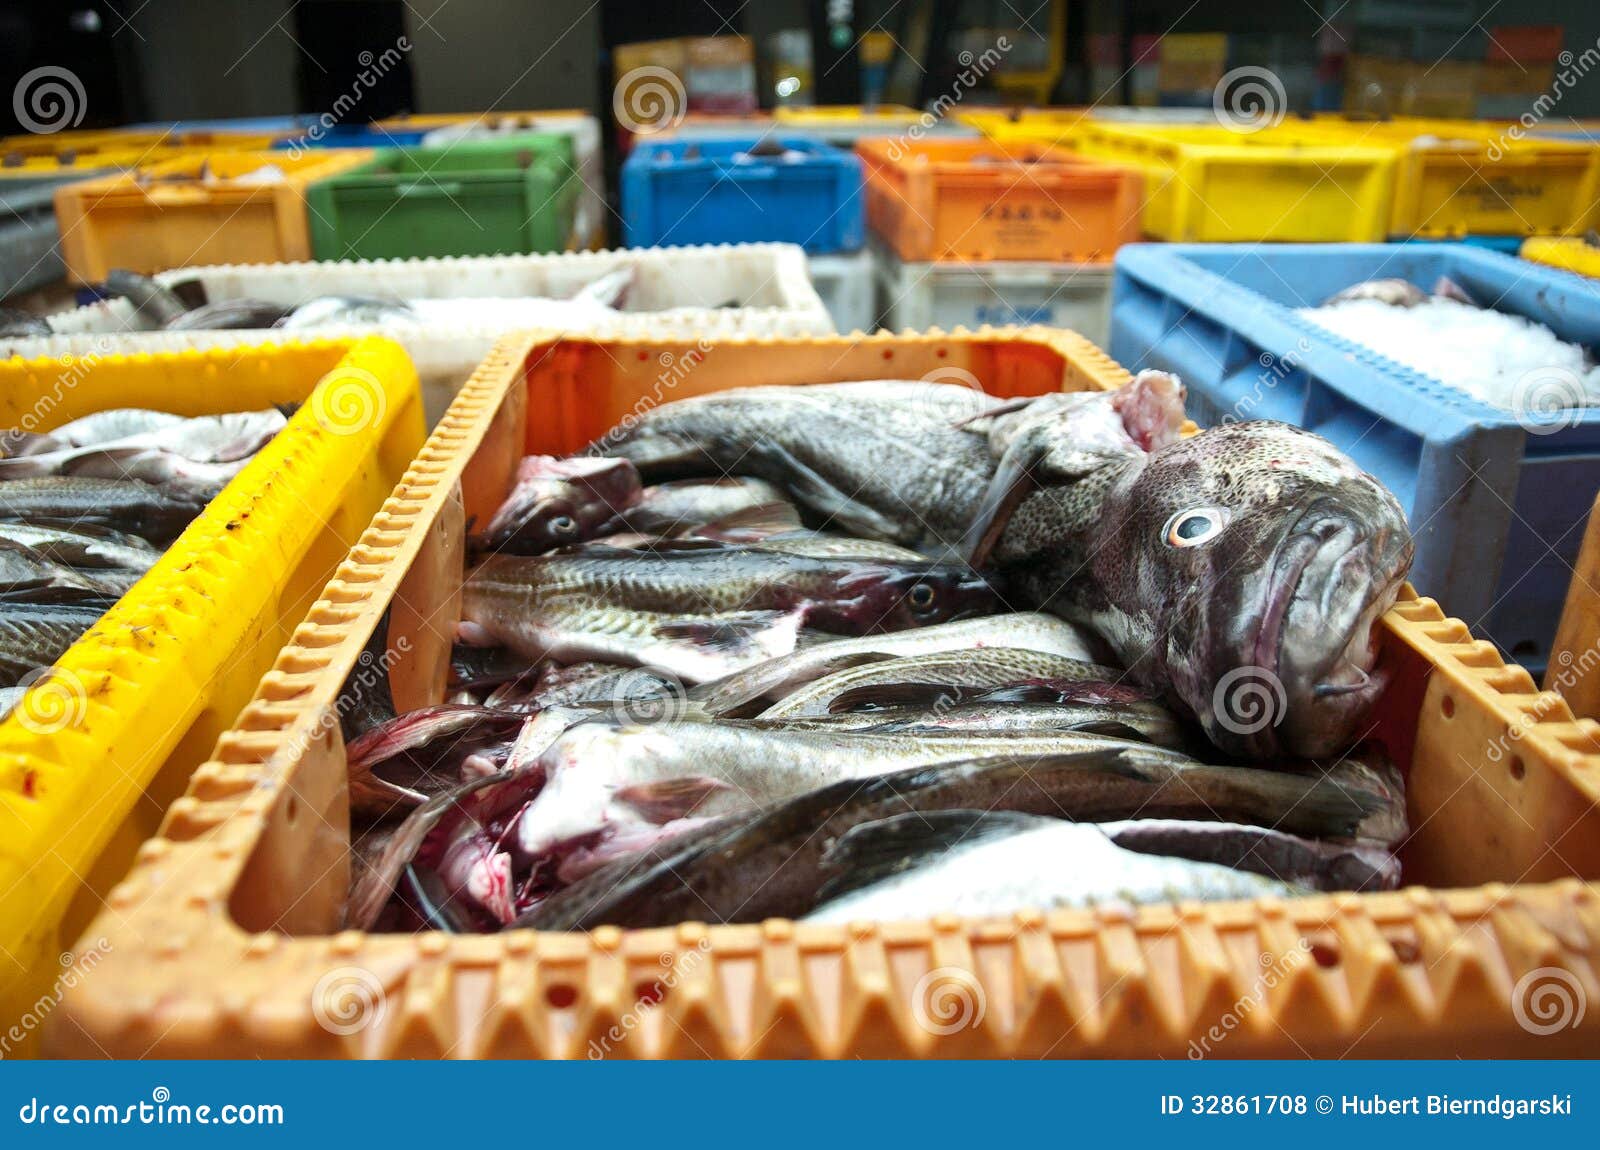 Fresh Cod Fish in Shipping Container Stock Photo - Image of boxes, cleaned:  32861708